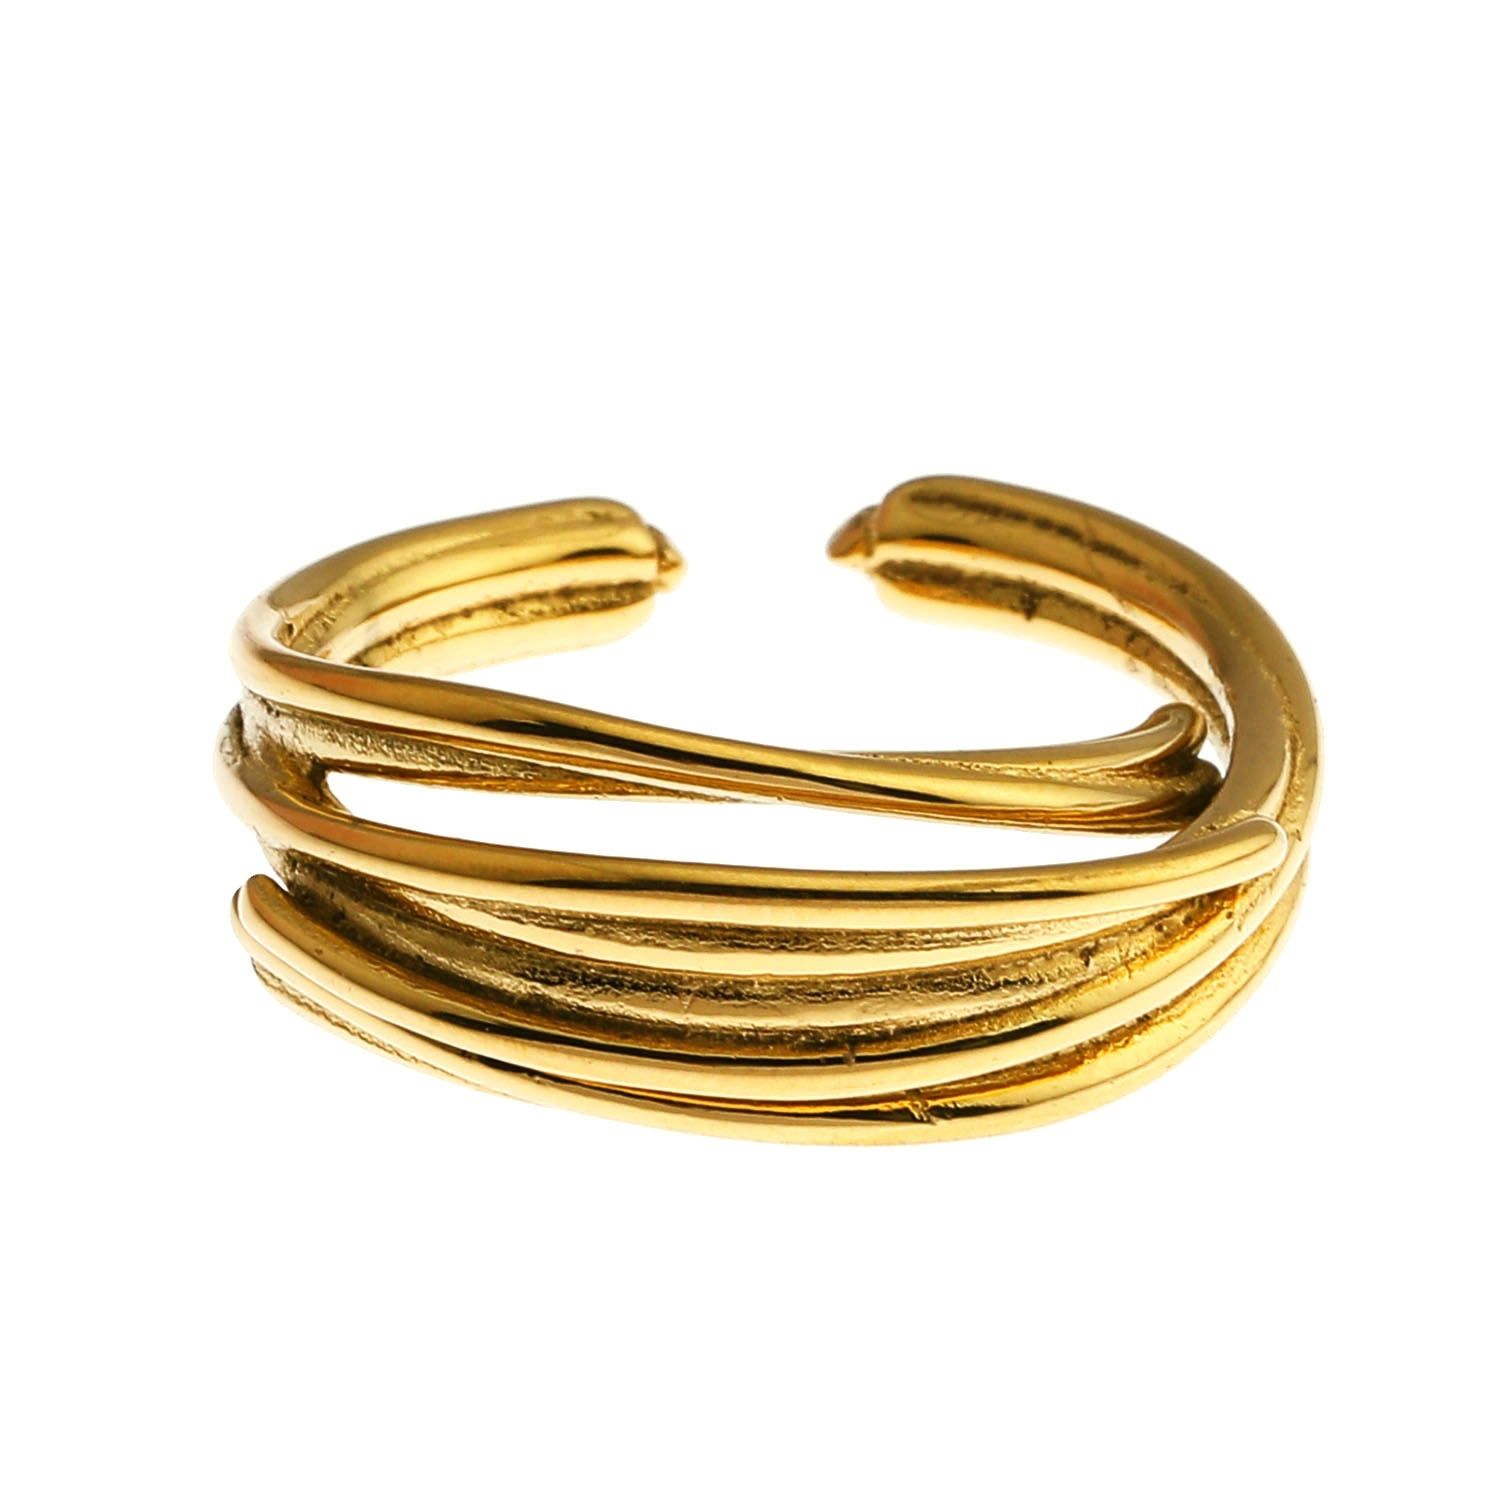 stacked-ring | abstract-design-ring | modern-ring | fashion-ring | hackney-nine | hackneynine | necklace | hoops | bracelets | earrings | charms | studs_earrings | jewellery | jewellery-store | shop-jewelry | gold-jewellery | silver-jewellery | dressy_jewellery | classy_ jewellery | on_trend_jewellery | fashion_ jewellery | cool_jewellery | affordable_jewellery | designer_jewellery | vintage_jeweler | gifts-for-her | gifts-for-mum | gifts-for-girls | gifts-for-females | dainty-jewellery | bridesmaid-gift |